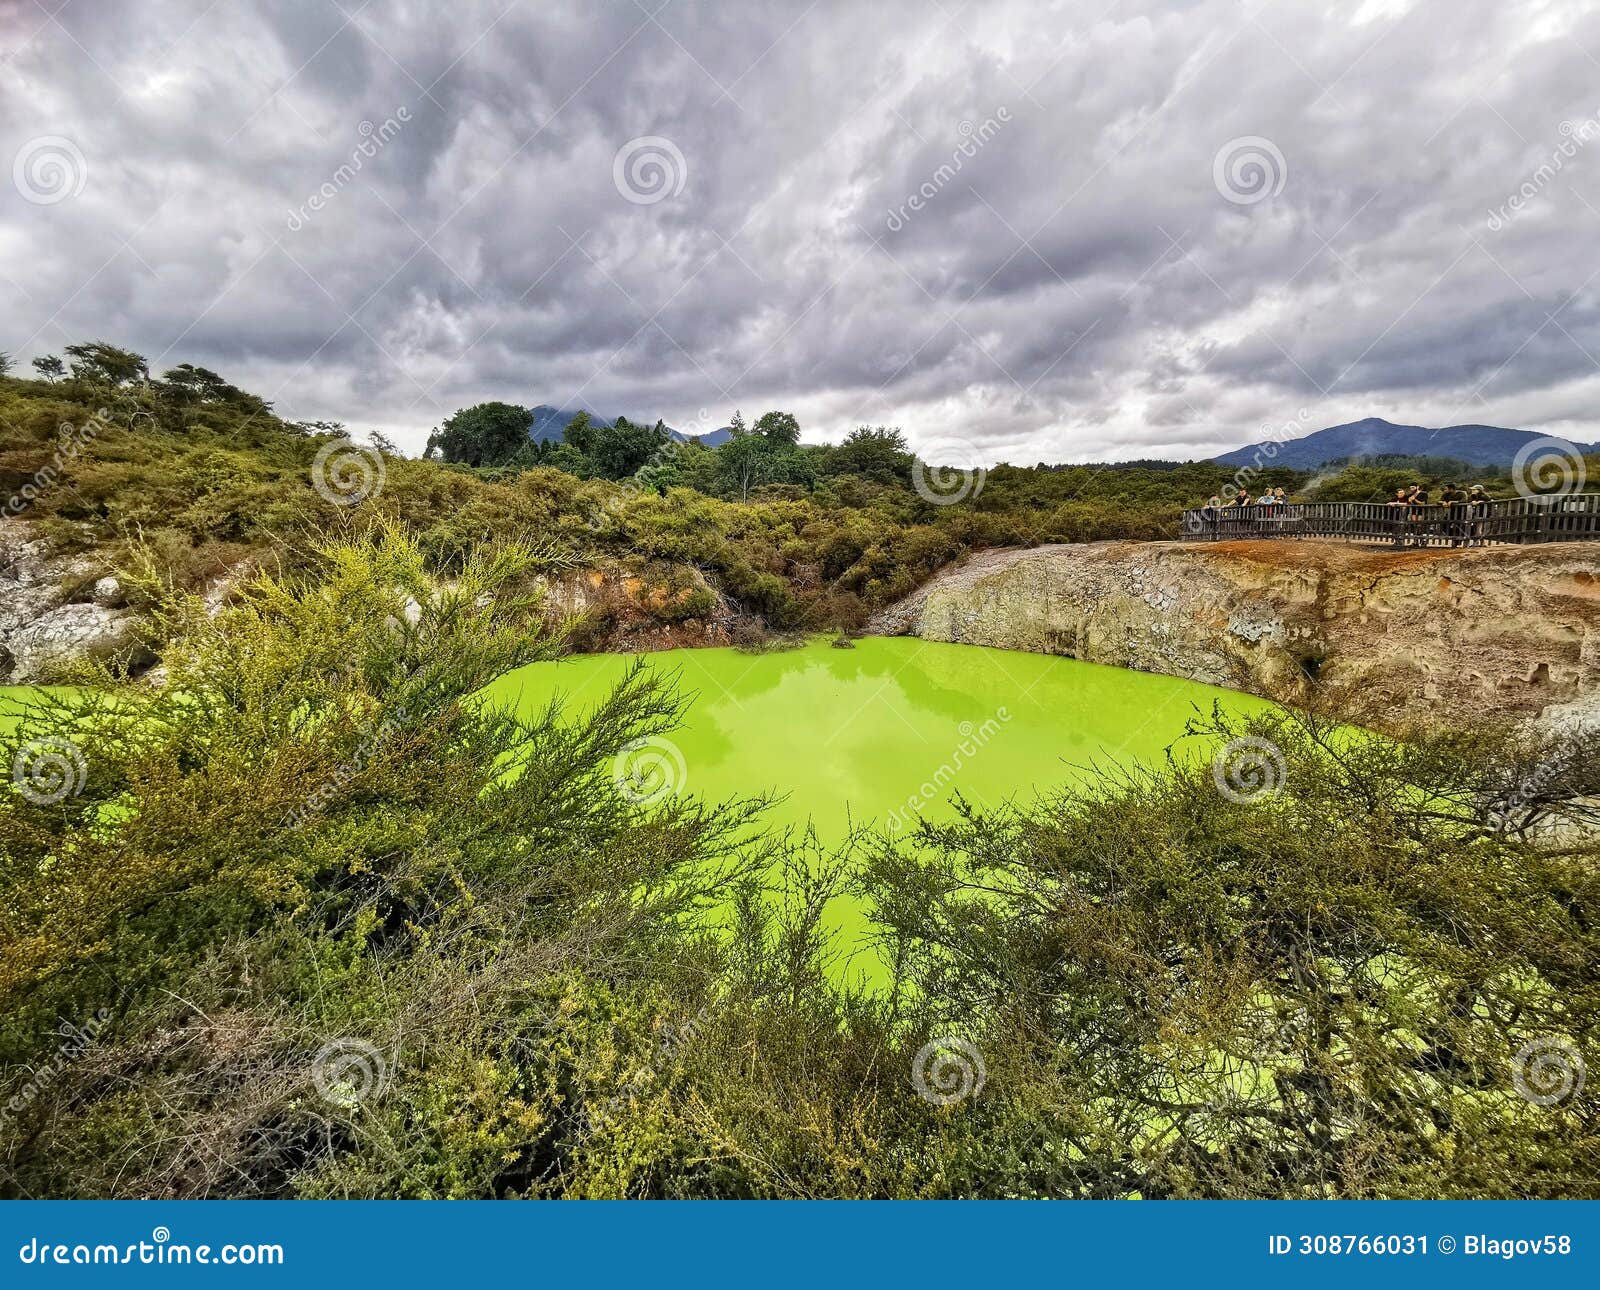 a green-coloured geothermally active lake in the wai-o-tapu park in new zealand